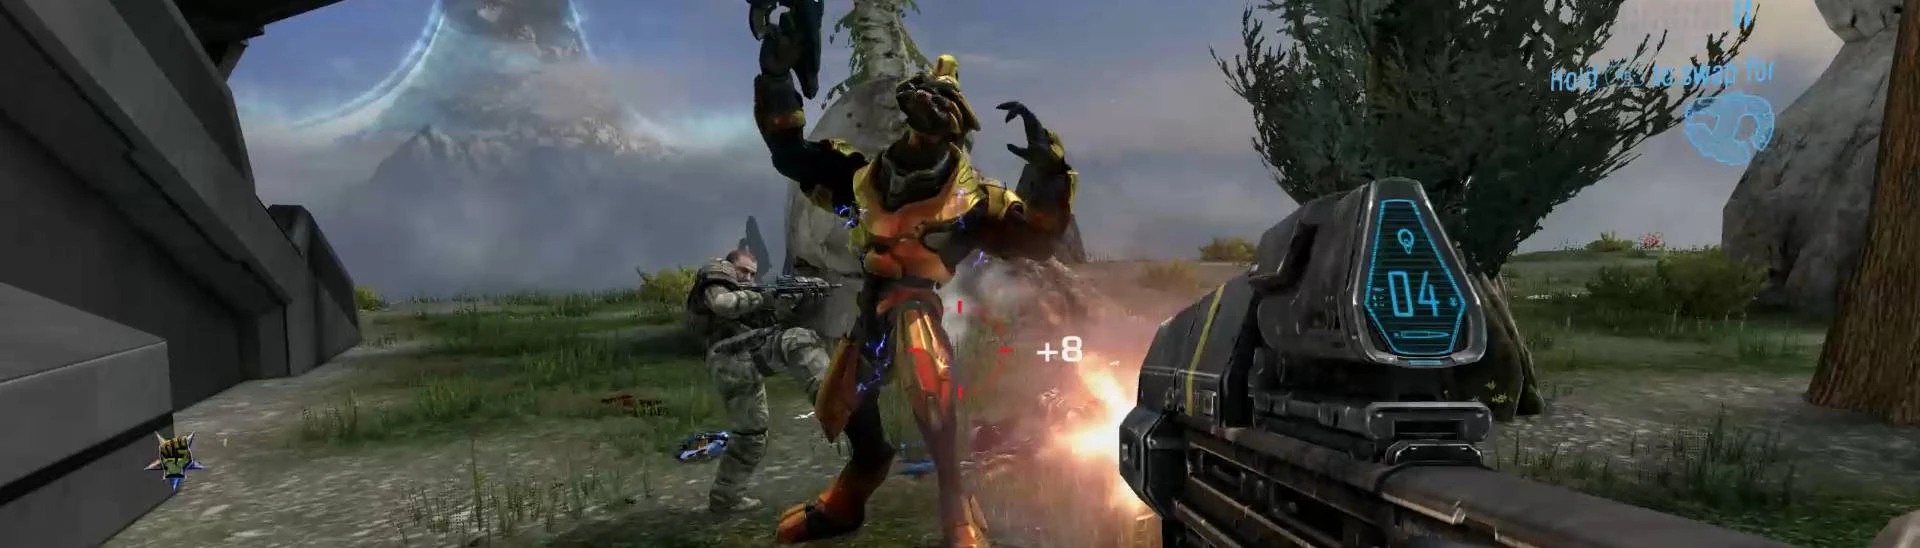 This Halo: Reach PC mod lets you fight humans in Firefight